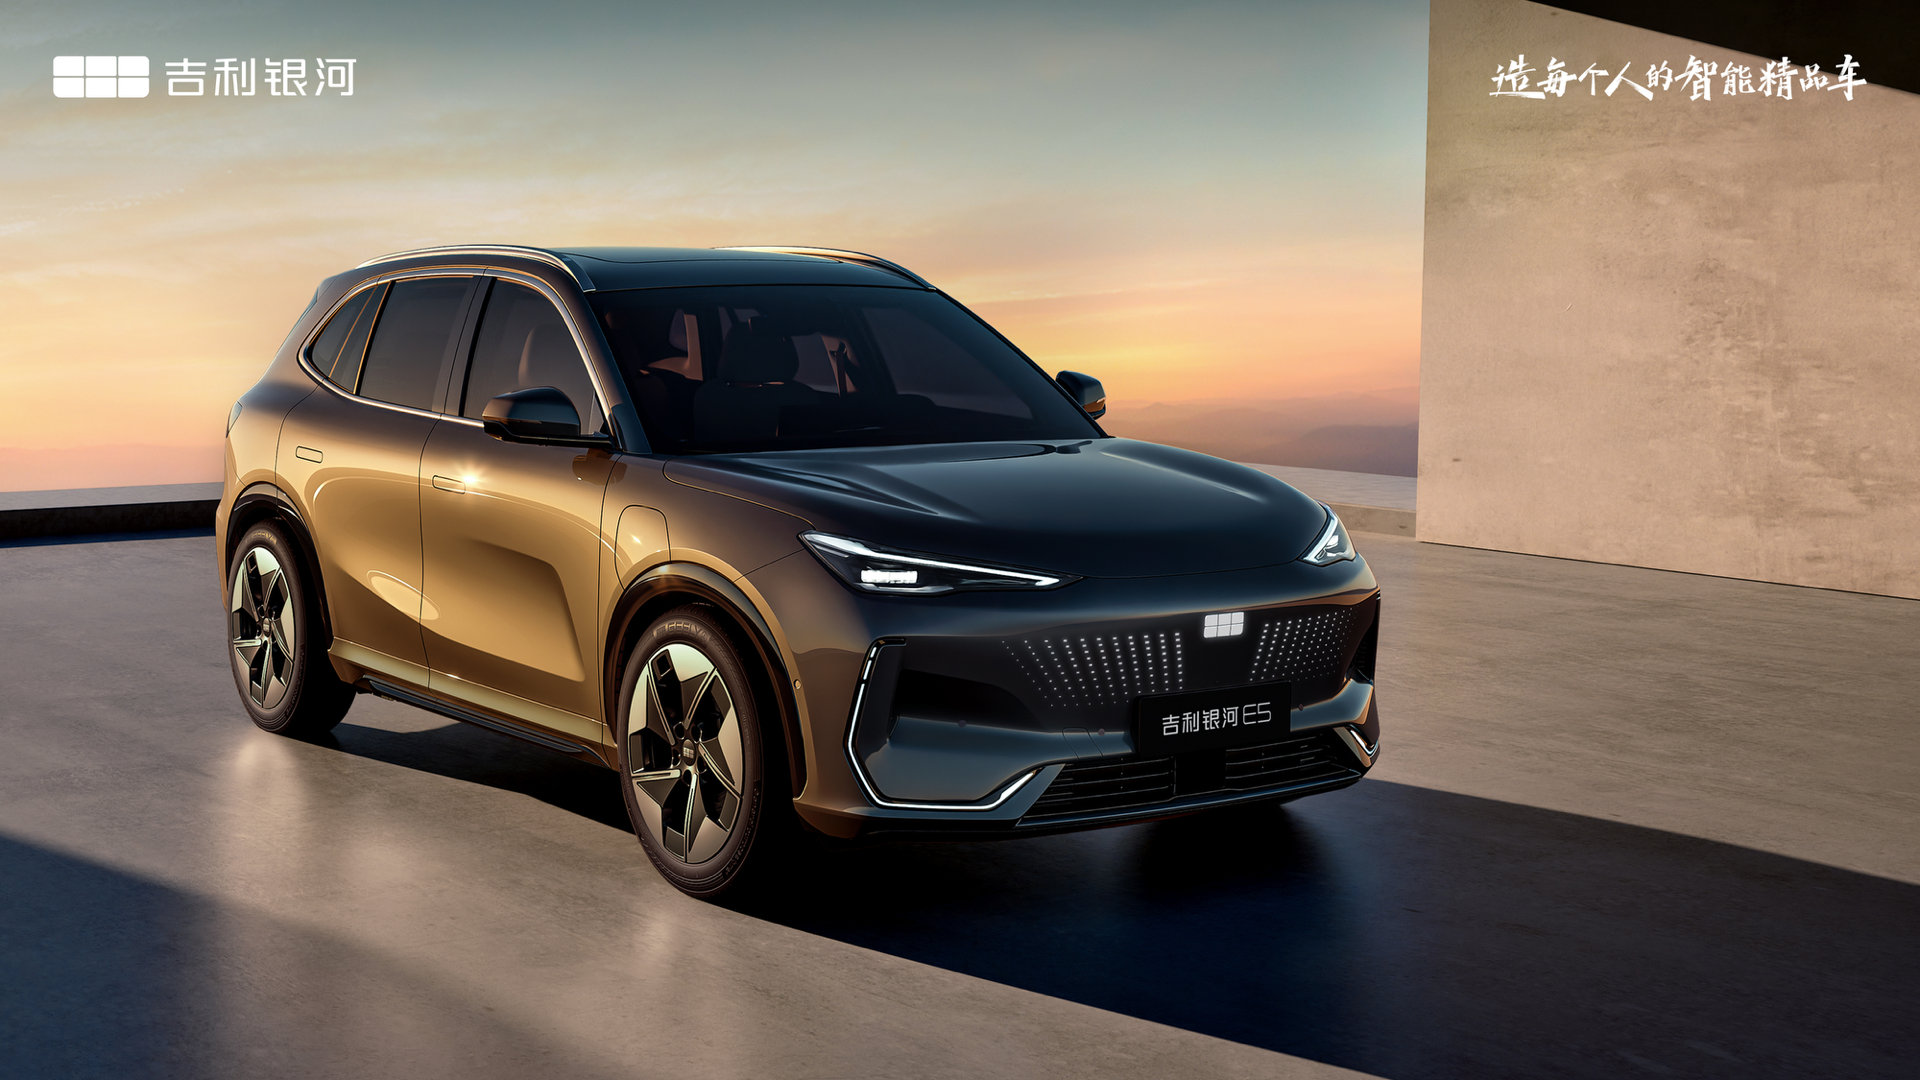 Competitor to the VW ID.4 and Tesla Model Y: Geely has unveiled the Galaxy E5 compact electric crossover